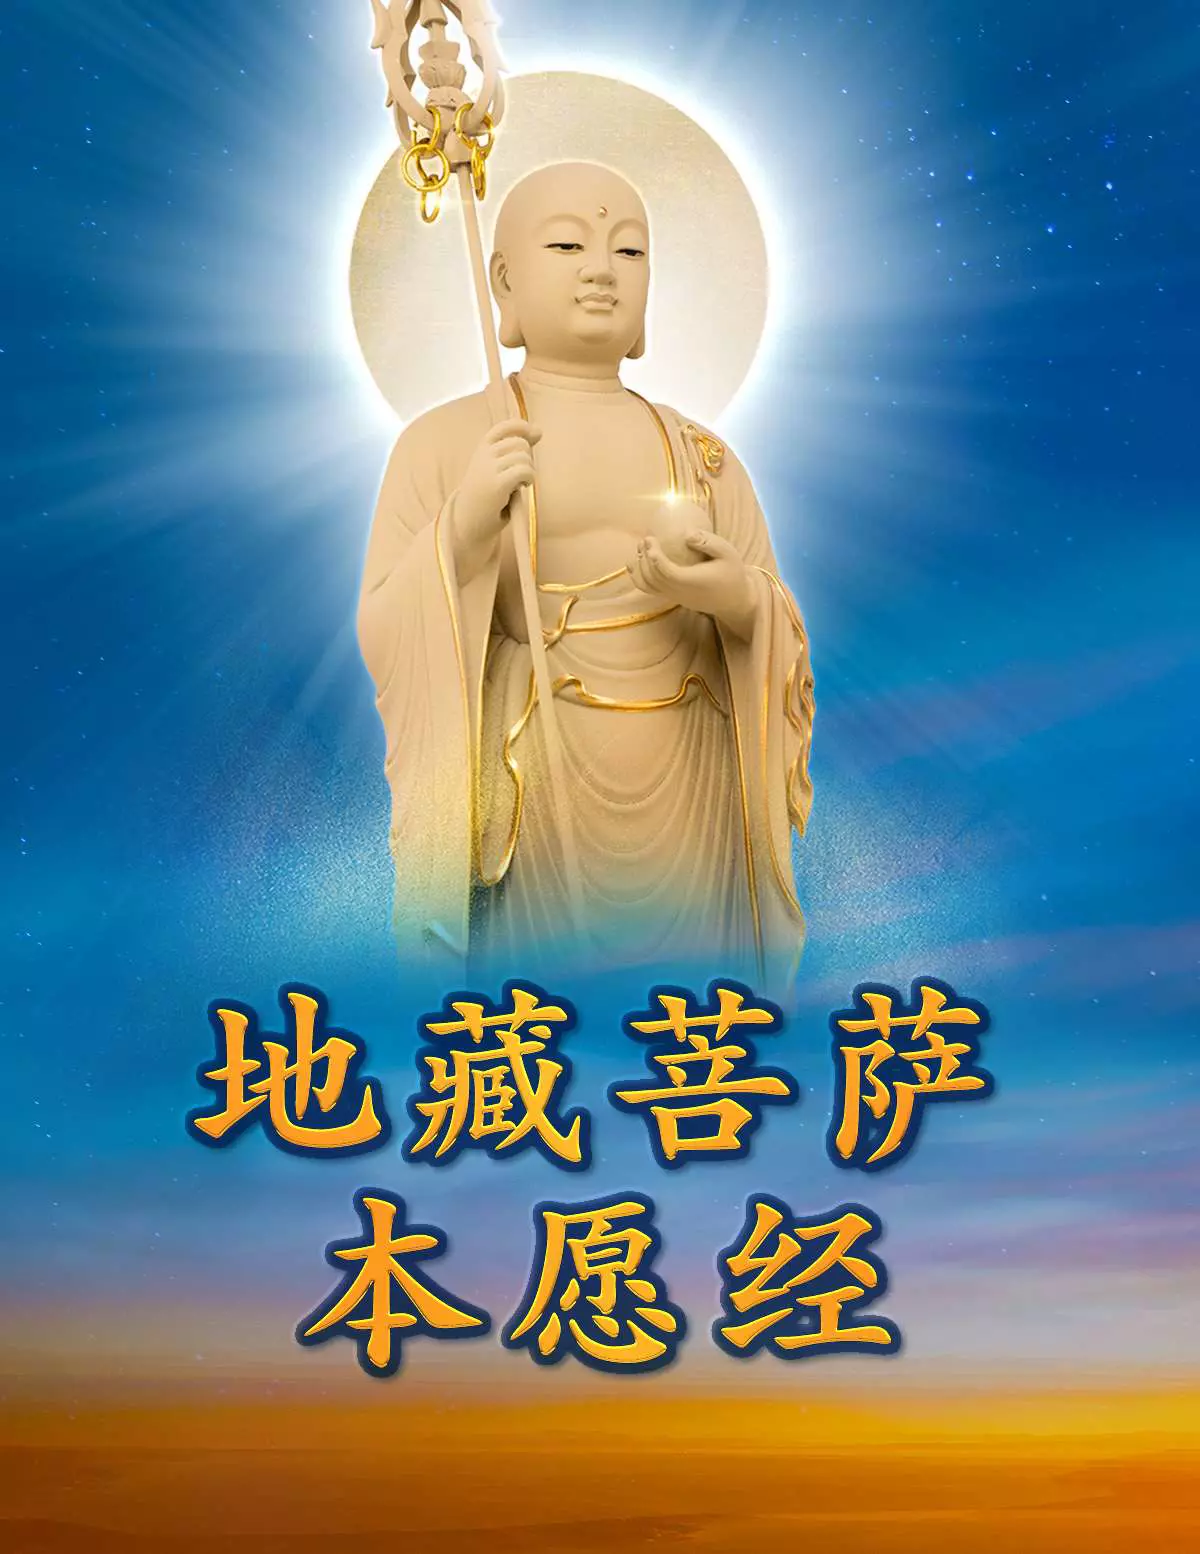 The Earth Store Bodhisattva's Vow Sutra Free e-book (Simplified 